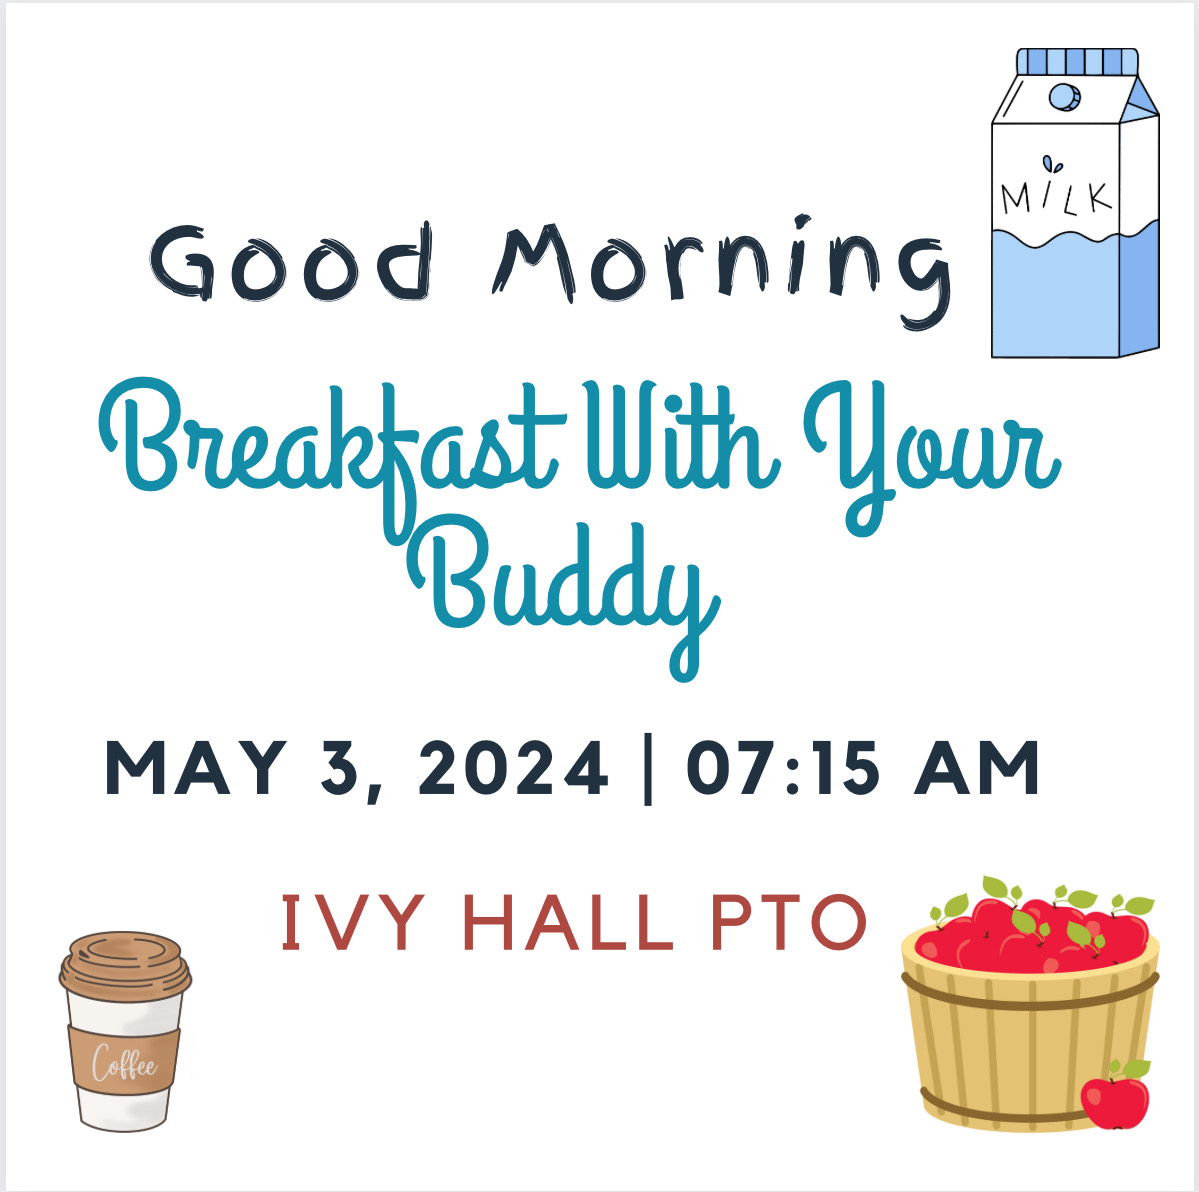 Ivy Hall PTO Breakfast With Your Buddy, May 3 2024